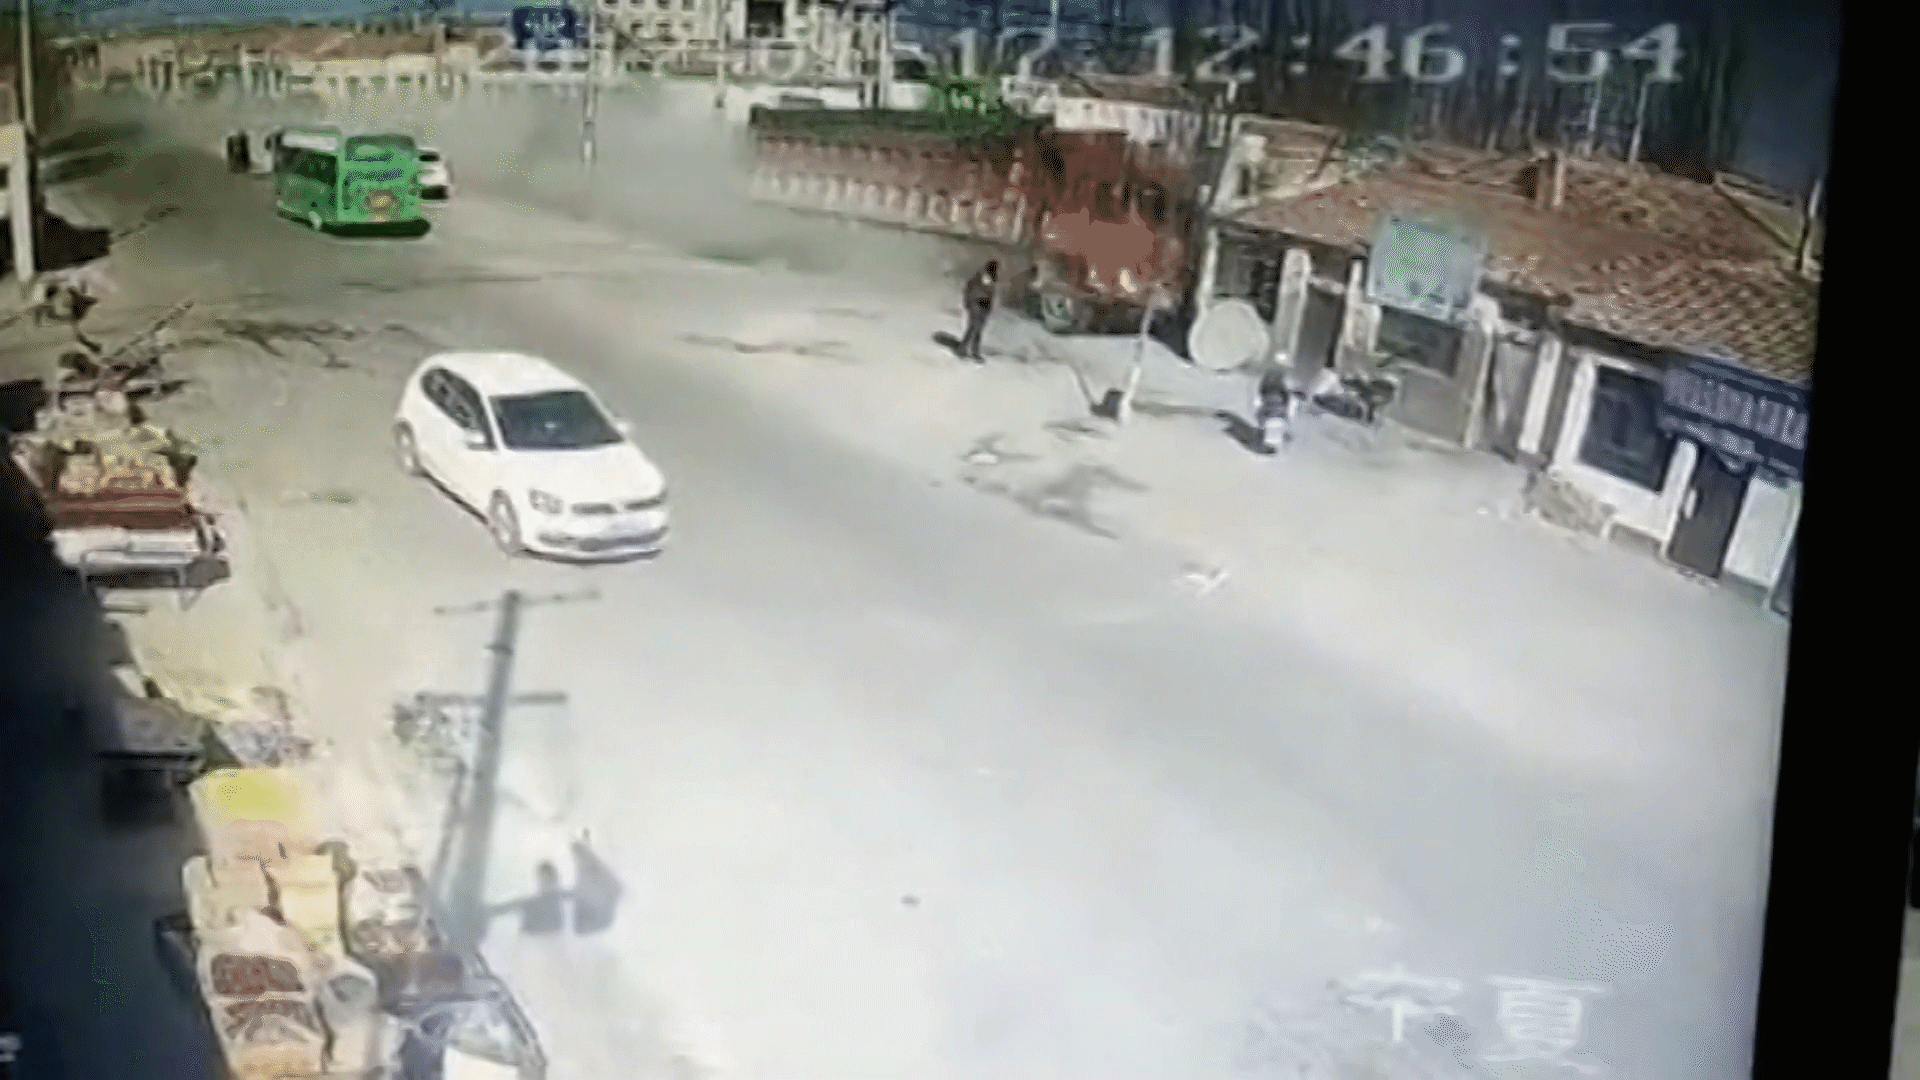 Vehicle moving at an astonishing speed, narrowly missing other cars (Gif: <b>The Quint</b>)